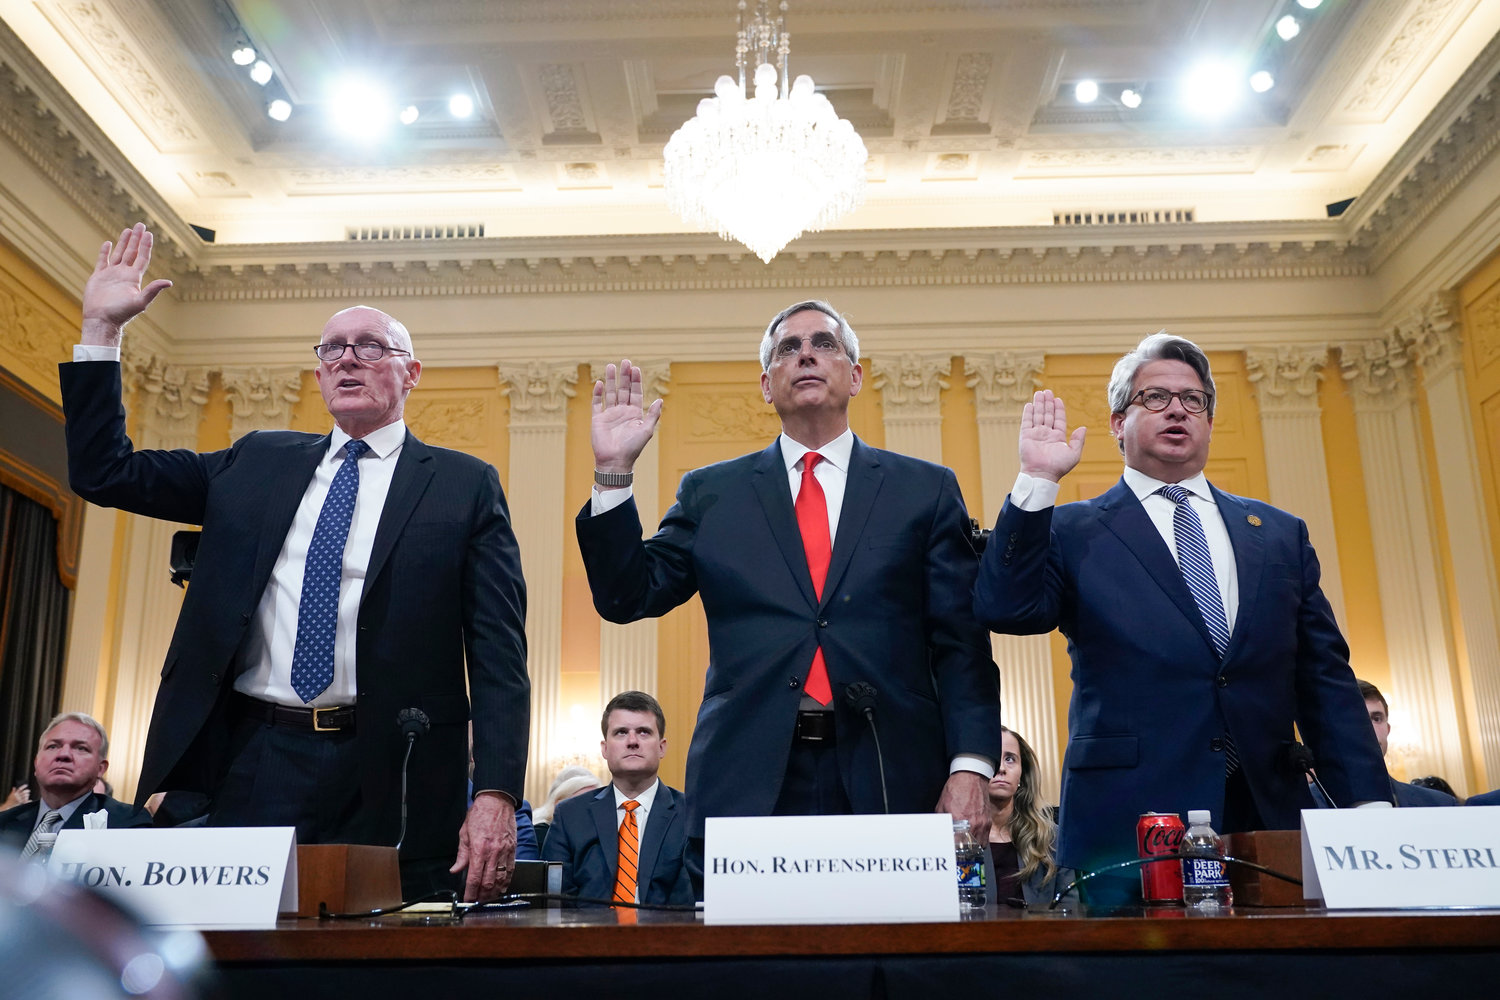 Rusty Bowers, Arizona state House Speaker, from left, Brad Raffensperger, Georgia Secretary of State, and Gabe Sterling, Georgia Deputy Secretary of State, are sworn in to testify as the House select committee investigating the Jan. 6 attack on the U.S. Capitol continues to reveal its findings of a year-long investigation, at the Capitol in Washington, Tuesday, June 21, 2022. (AP Photo/Jacquelyn Martin)